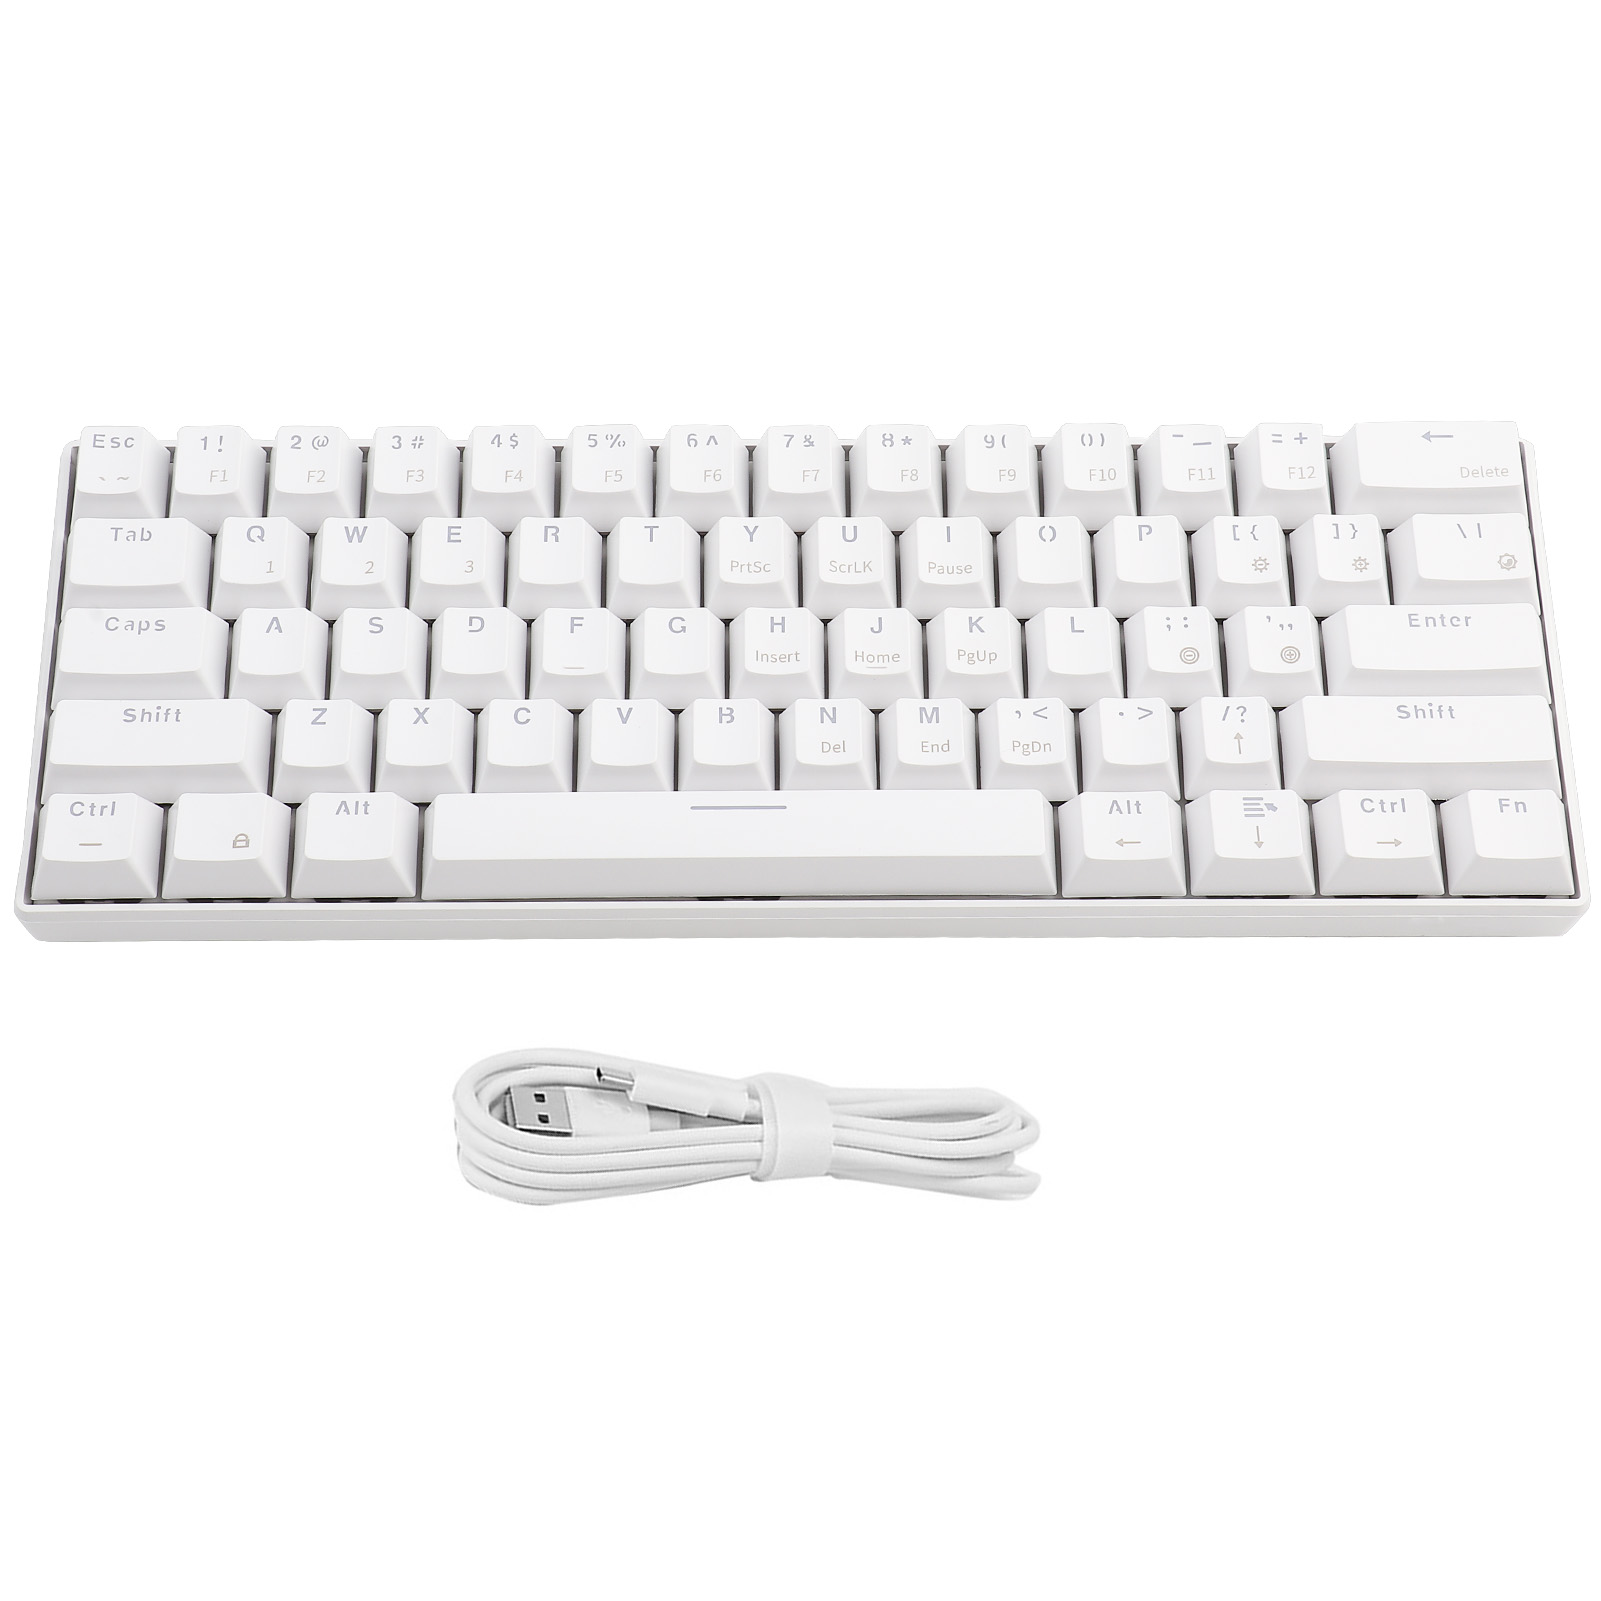 LED Backlit Wired Keyboard ABS Material Gaming Light-Emitting USB Keyboards for Computer PC White